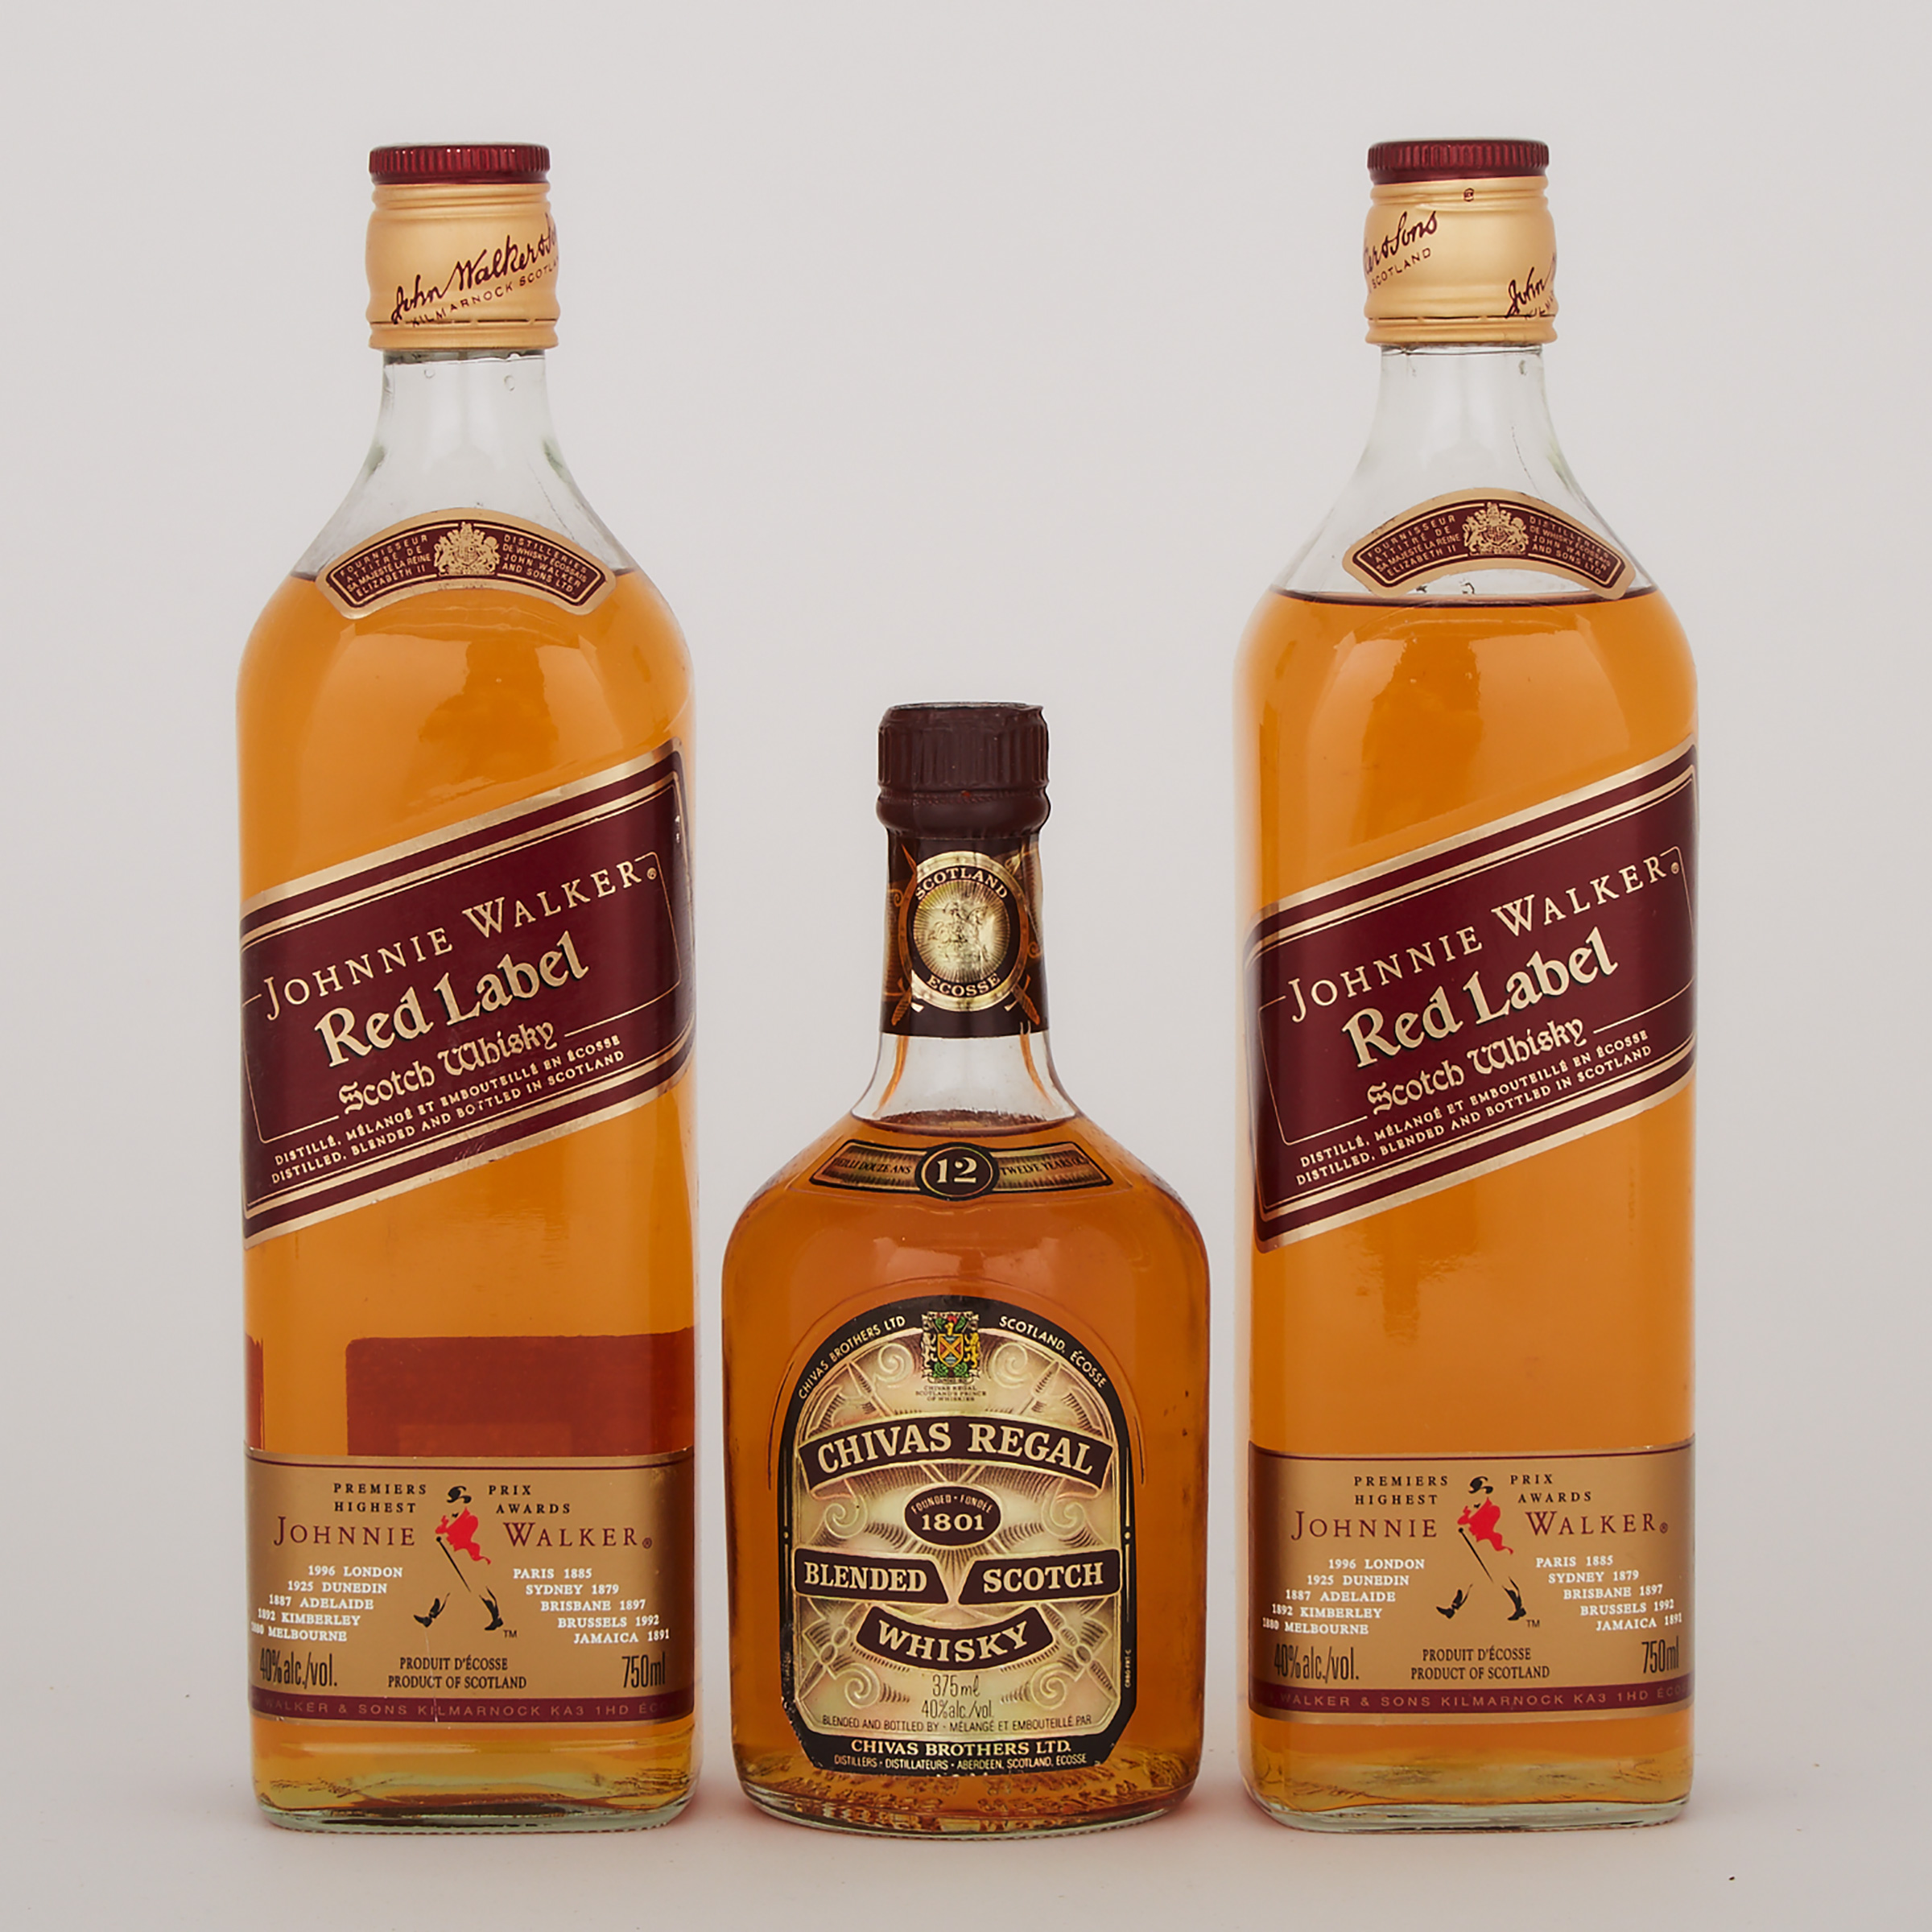 CHIVAS REGAL BLENDED SCOTCH WHISKY 12 YEARS (ONE 375 ML)
JOHNNIE WALKER RED LABEL SCOTCH WHISKY (ONE 750 ML)
JOHNNIE WALKER RED LABEL SCOTCH WHISKY (ONE 750 ML)